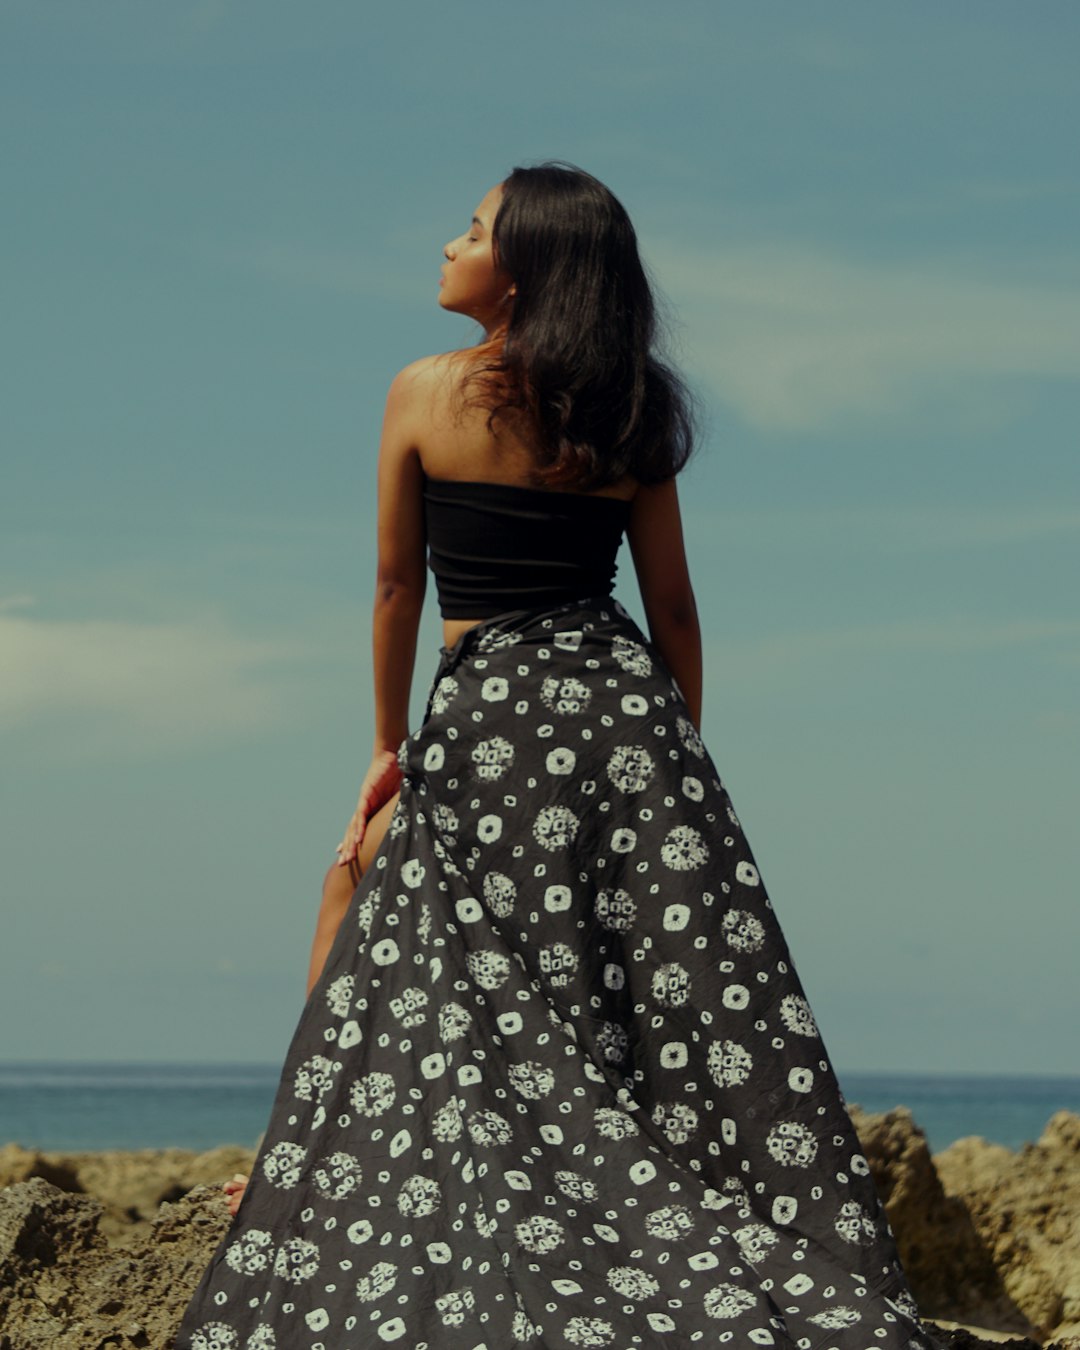 woman in black and white floral tube dress standing on brown sand during daytime